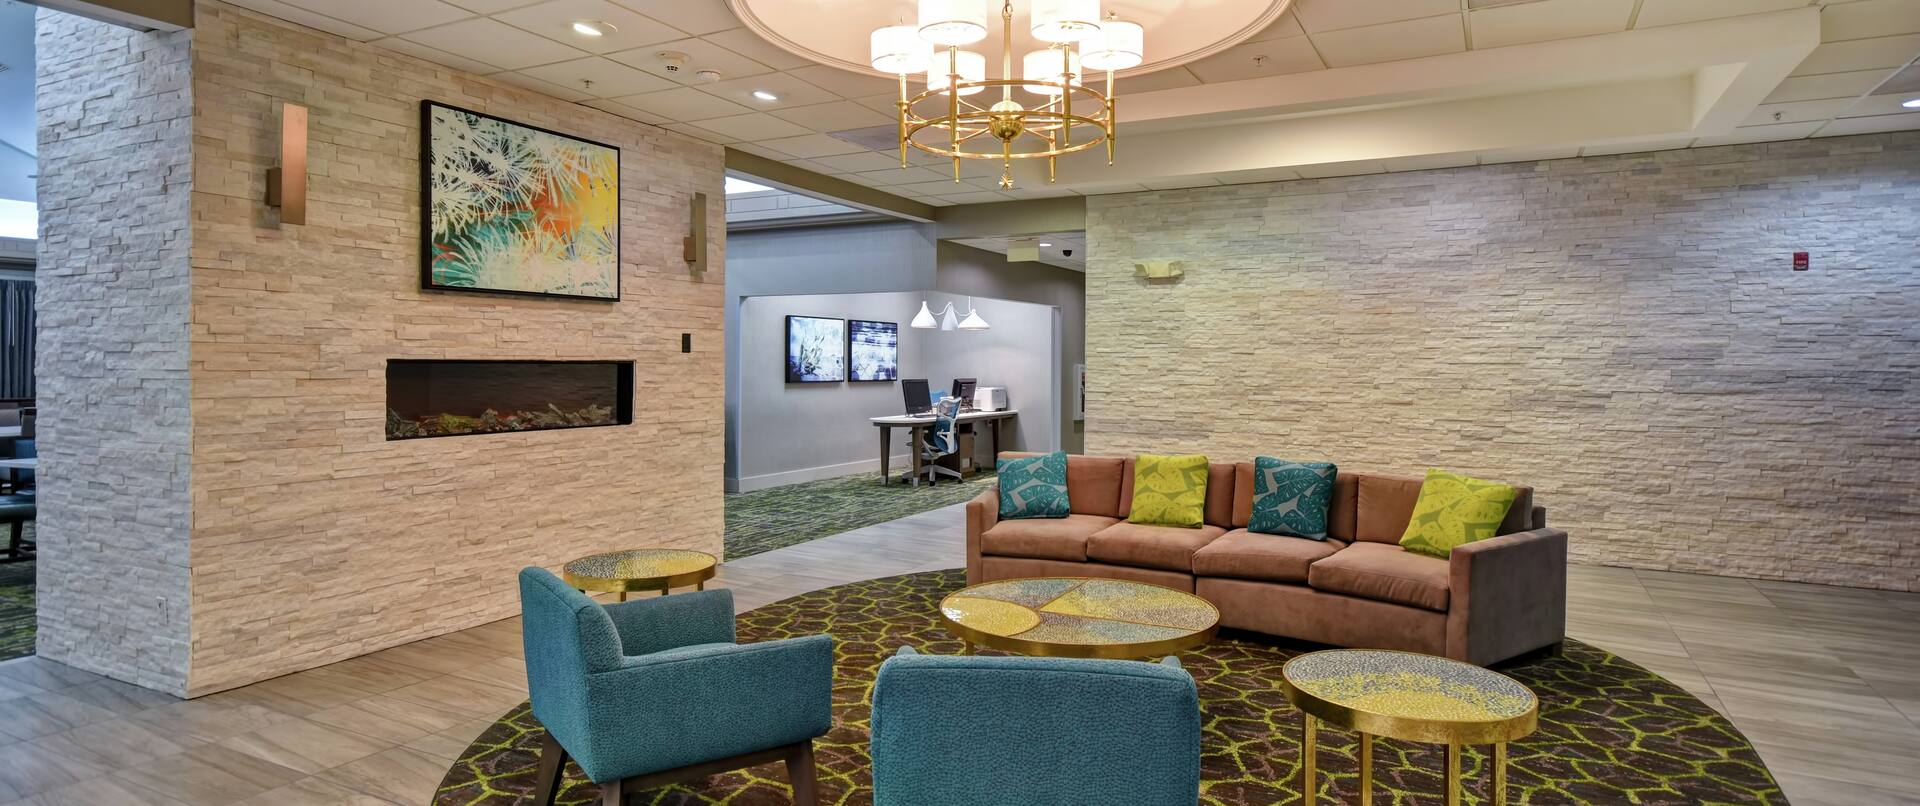 Hotel Lobby Seating Area And Business Center